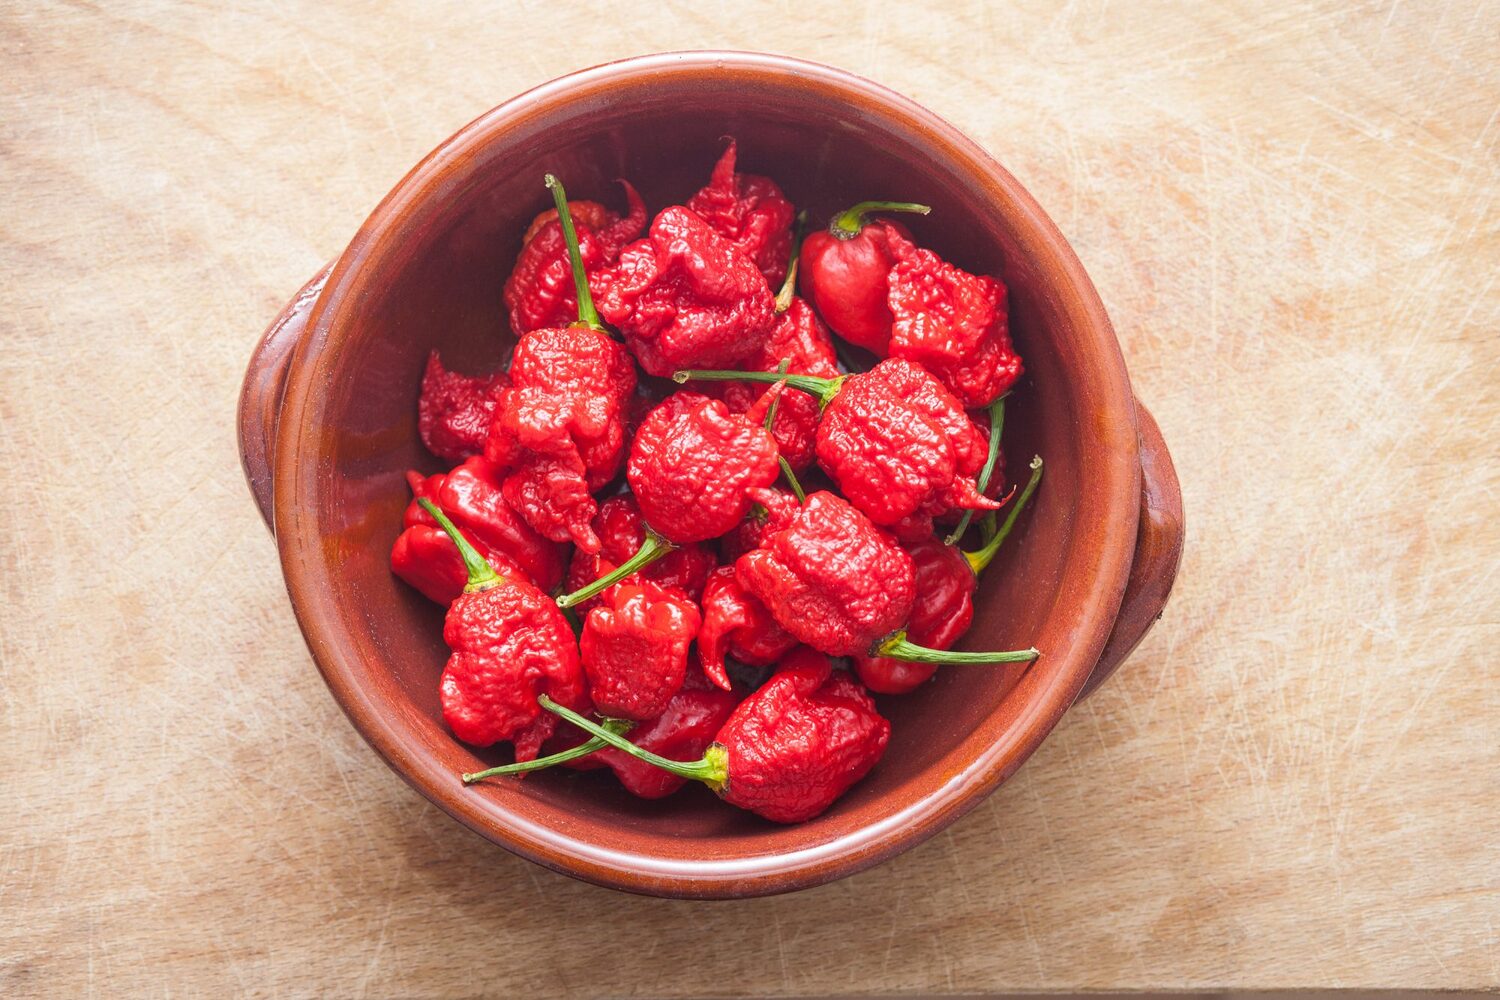 How To Store Carolina Reaper Peppers